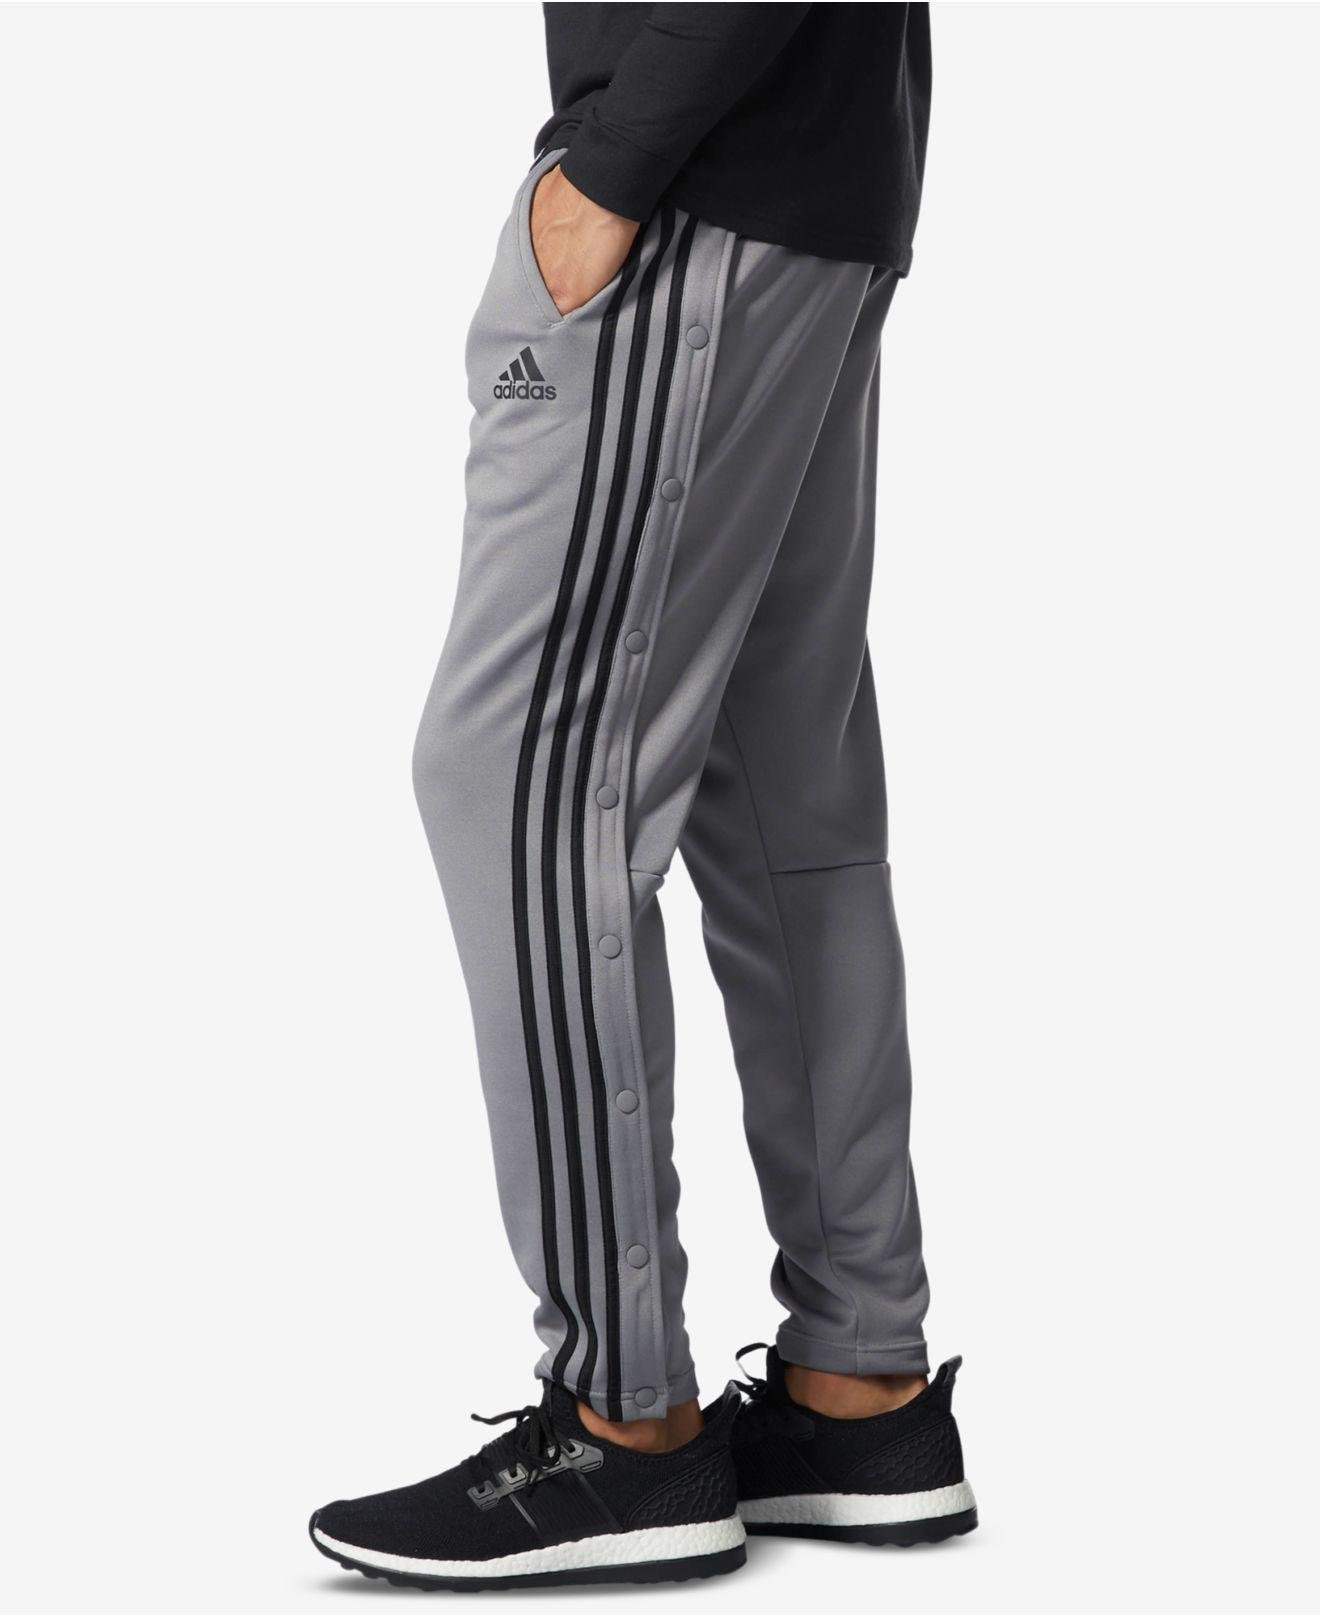 adidas Synthetic Men's Snap Track Pants in Grey Heather (Gray) for Men